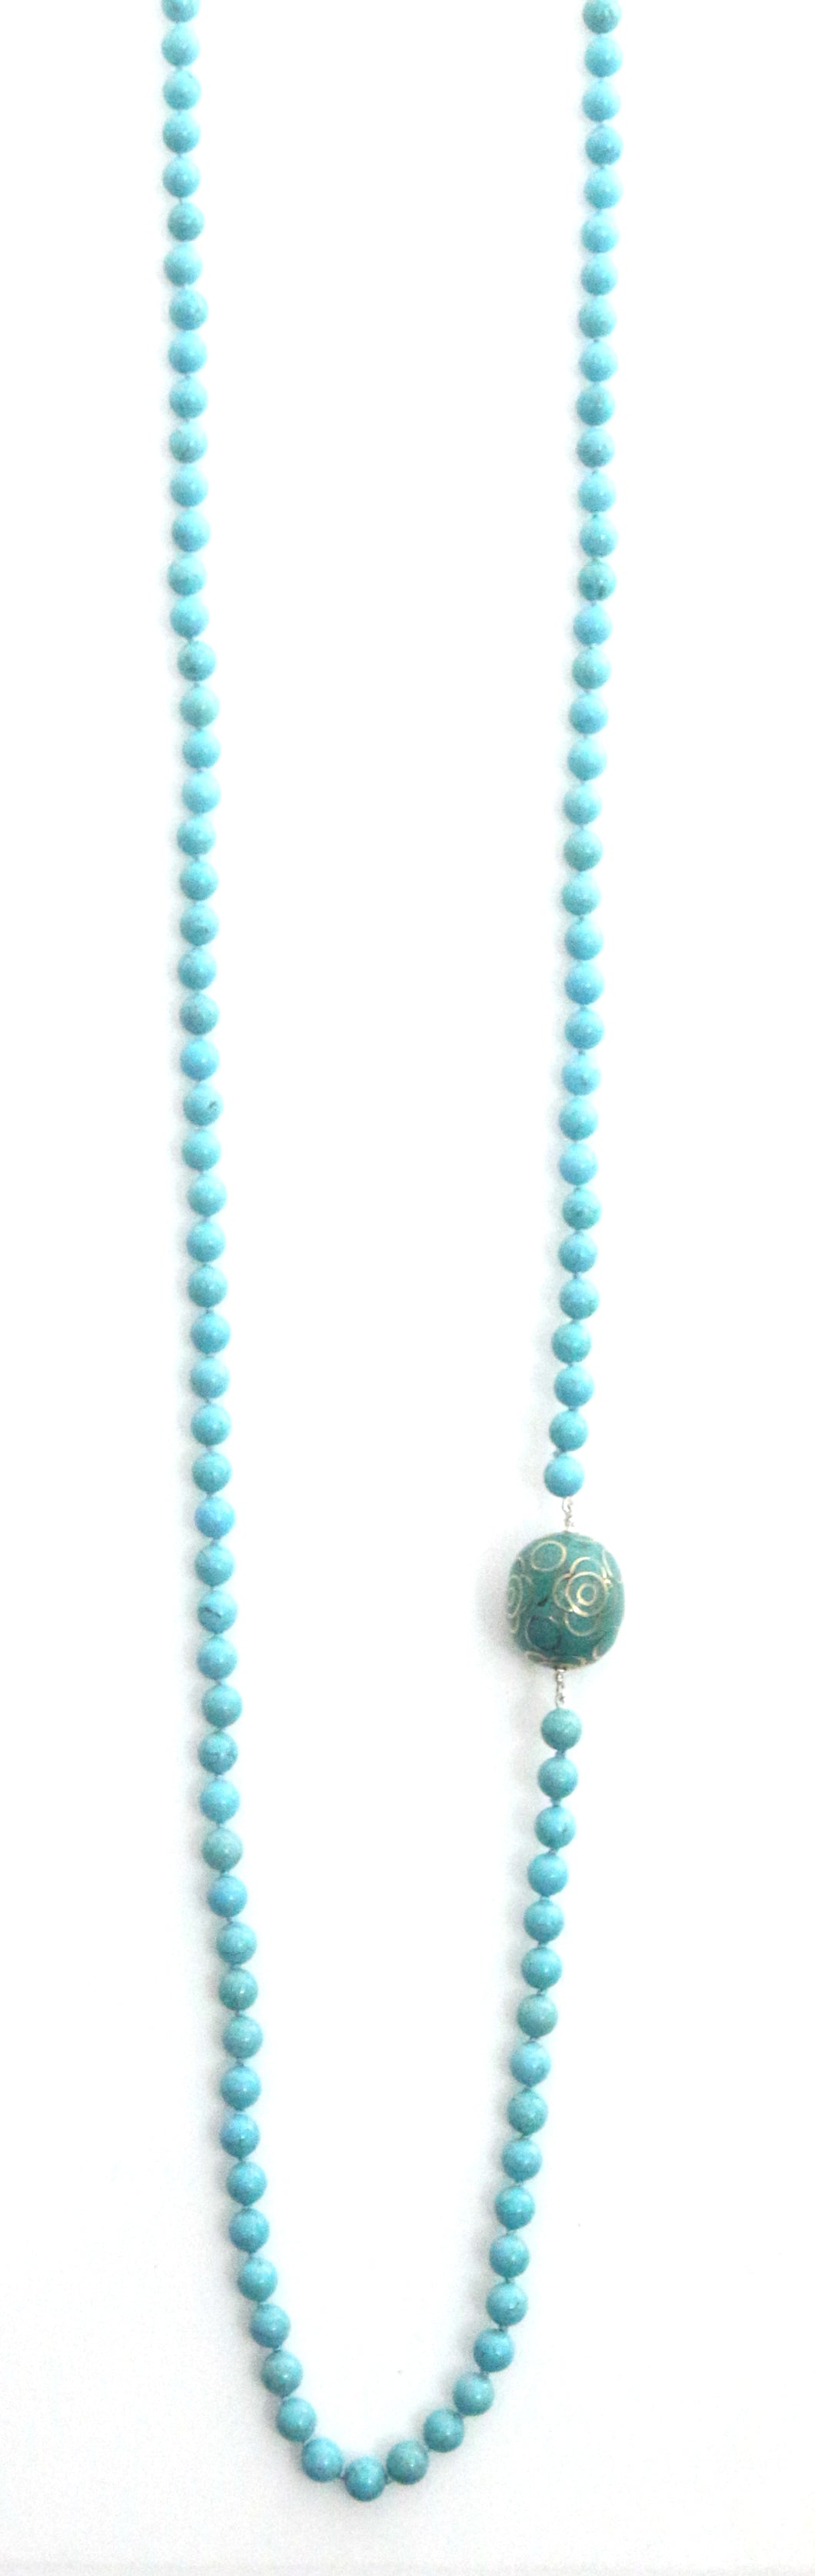 Australian Handmade Necklace with Howlite and Decorative Bead